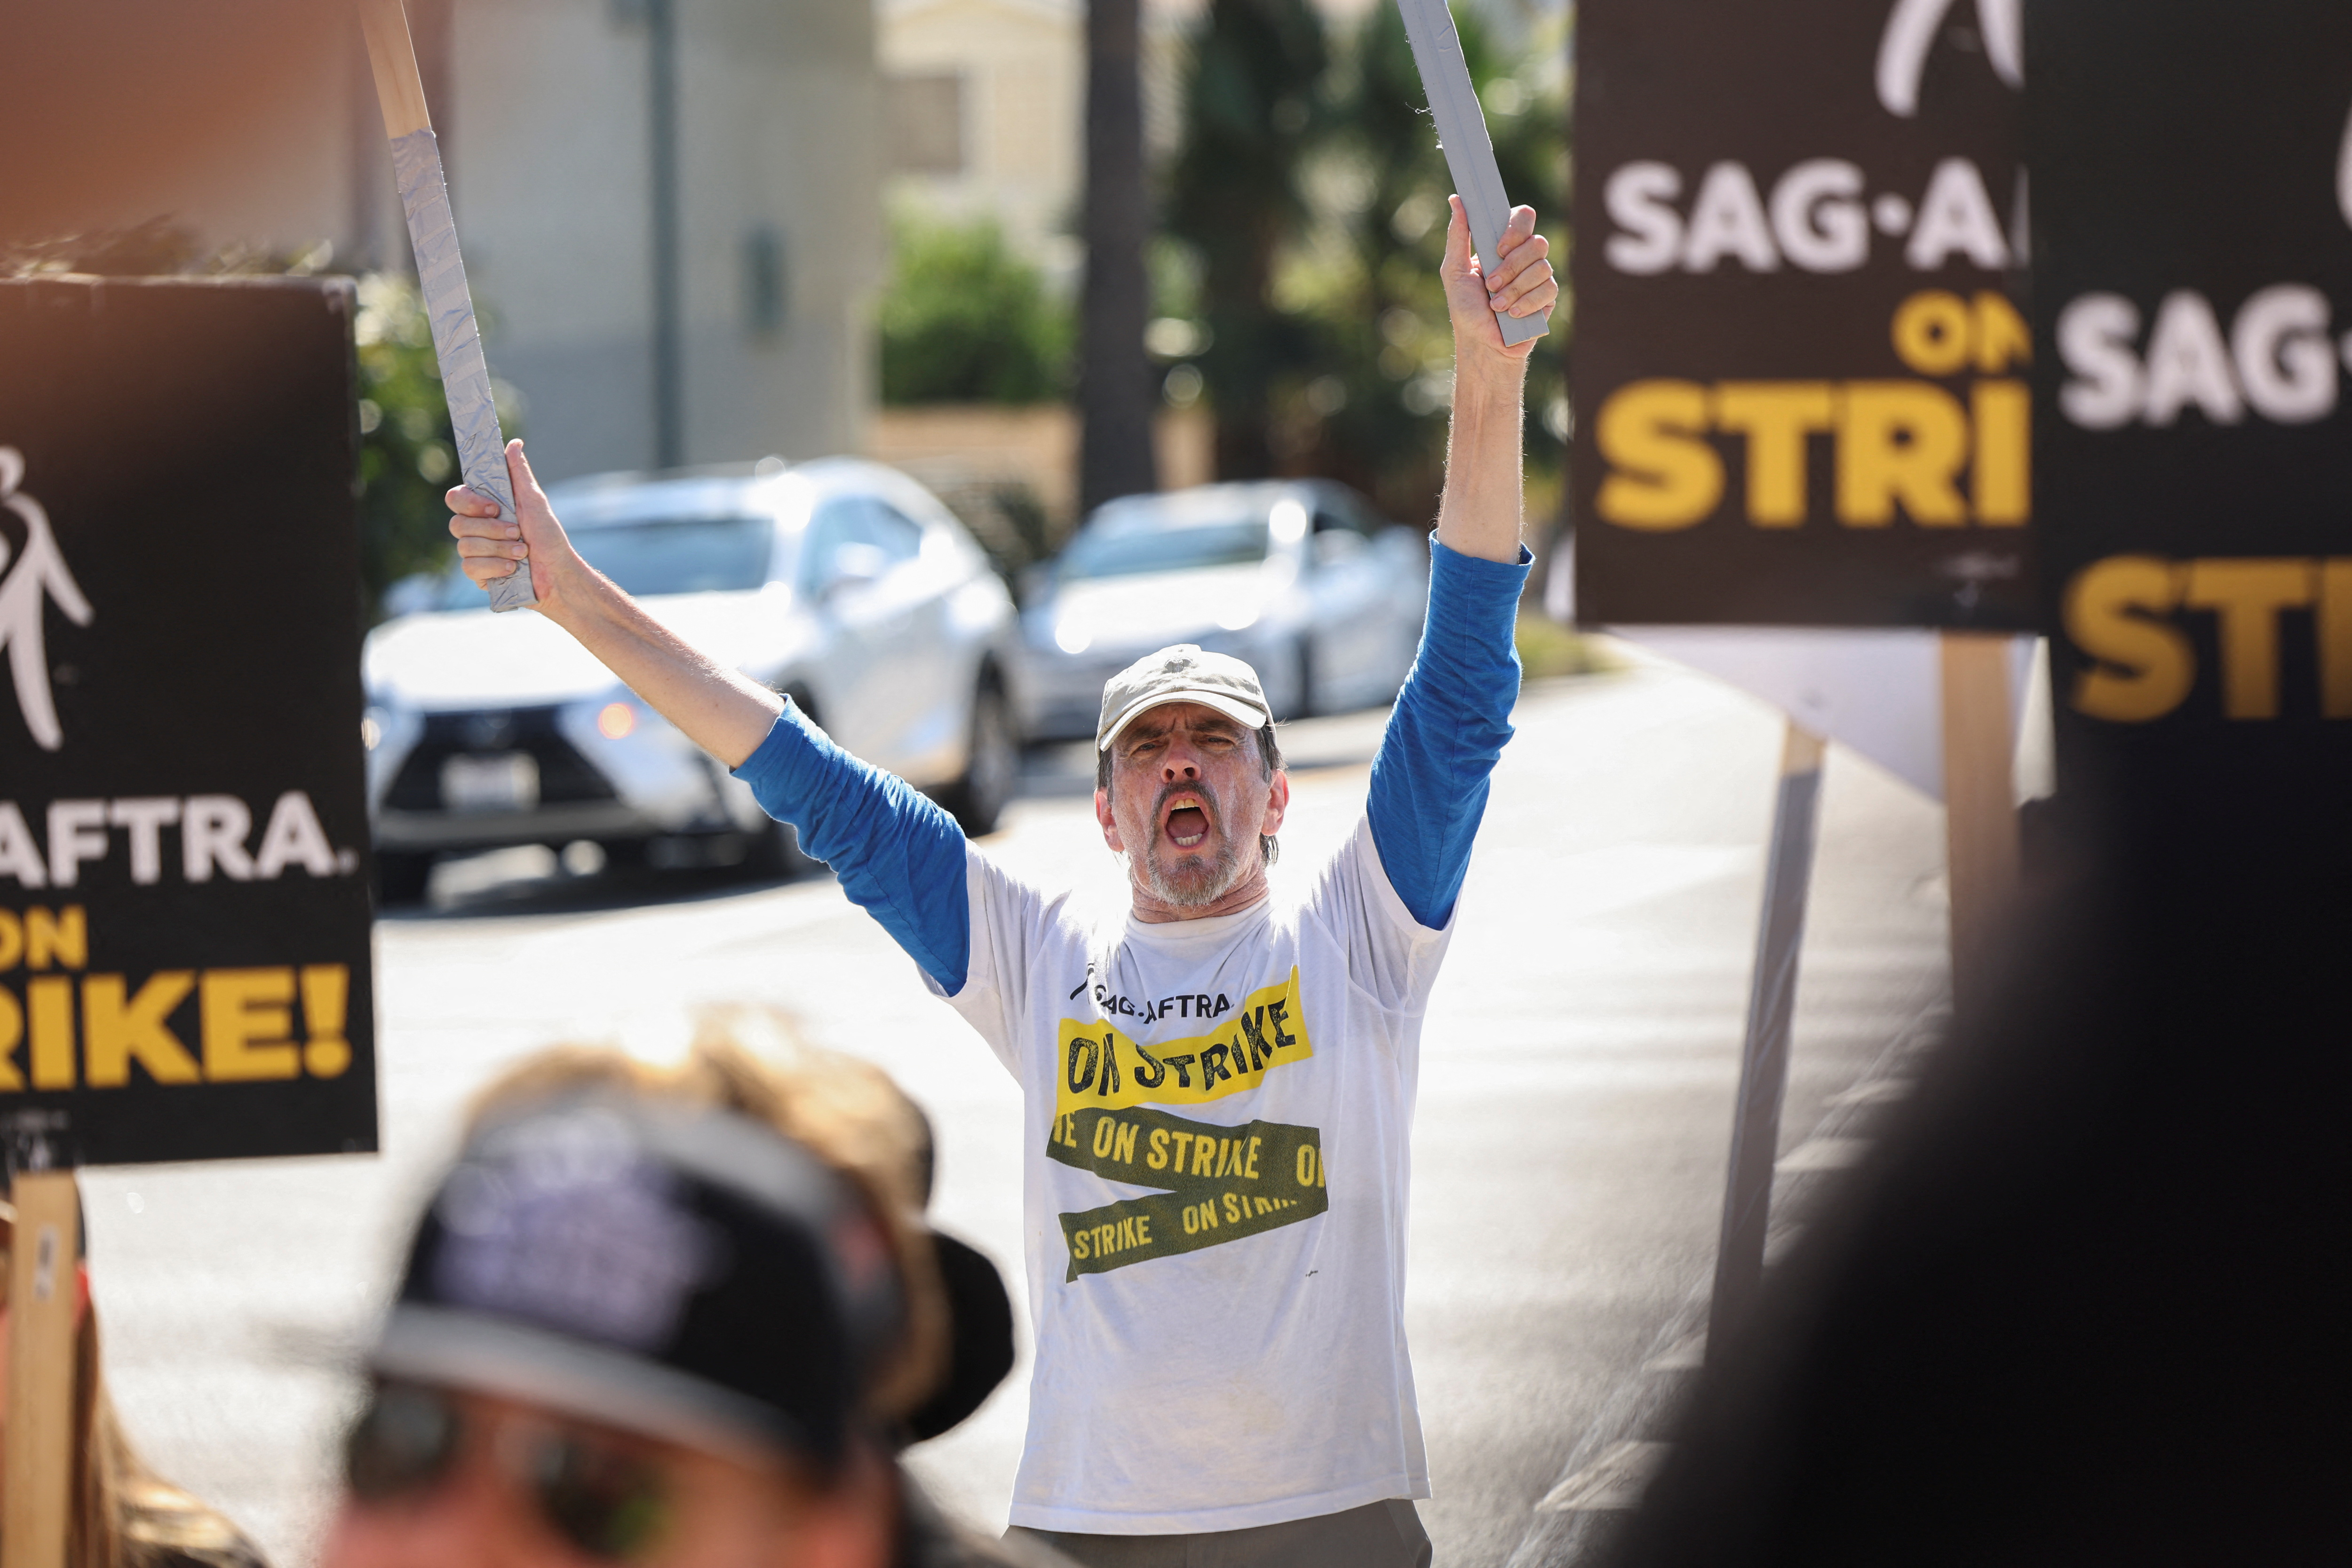 SAG-AFTRA members walk the picket line during their ongoing strike, in Los Angeles